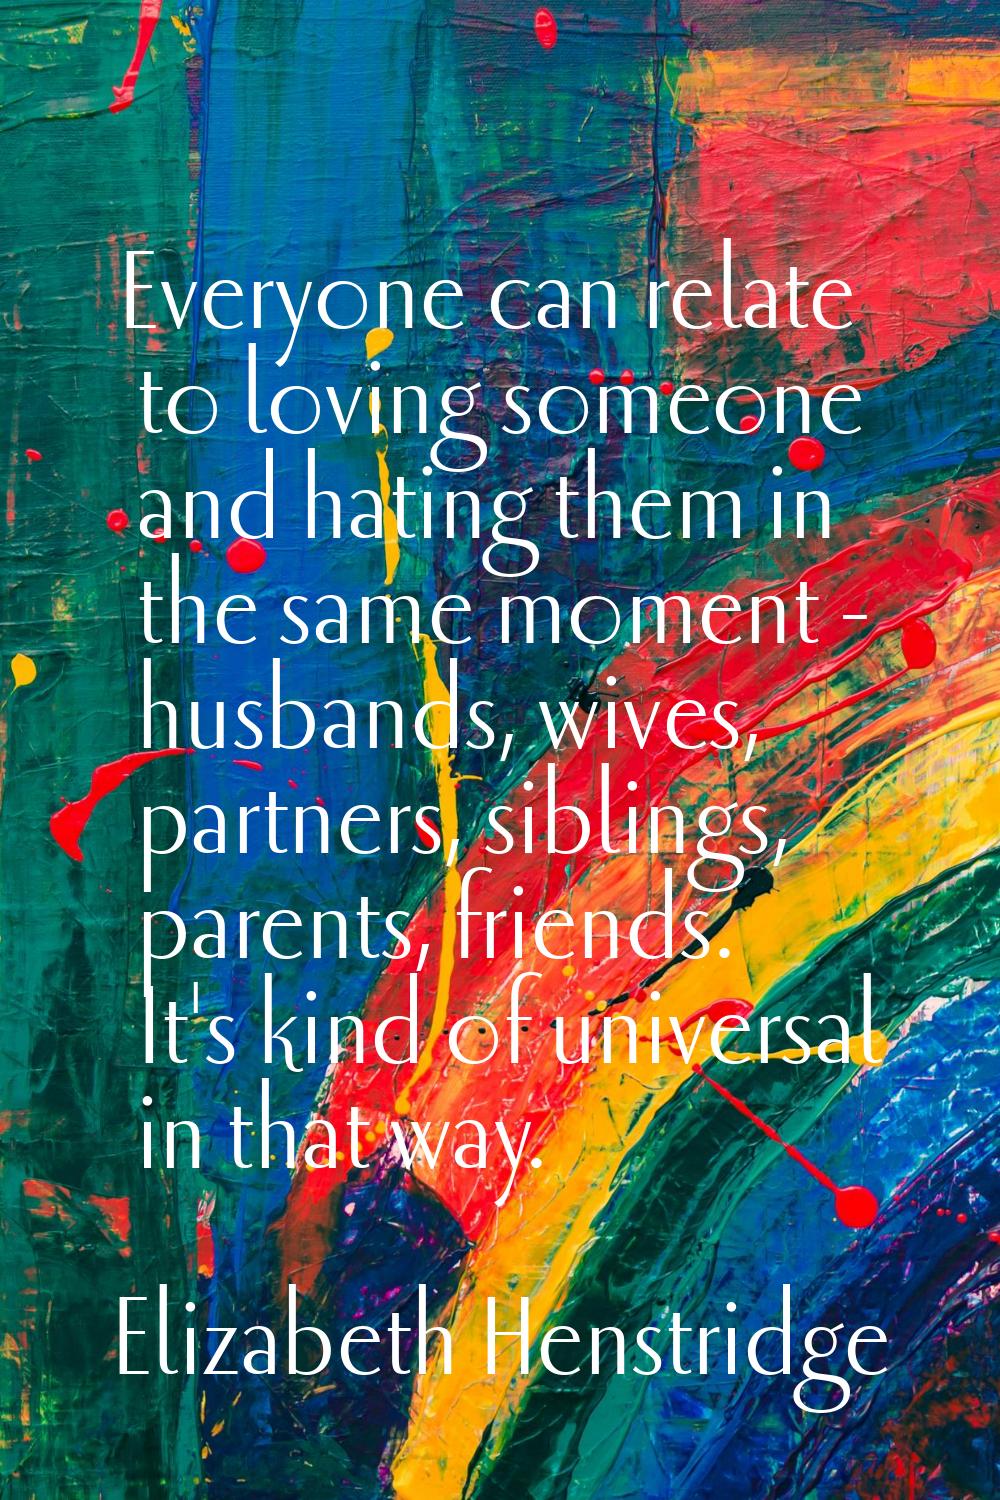 Everyone can relate to loving someone and hating them in the same moment - husbands, wives, partner